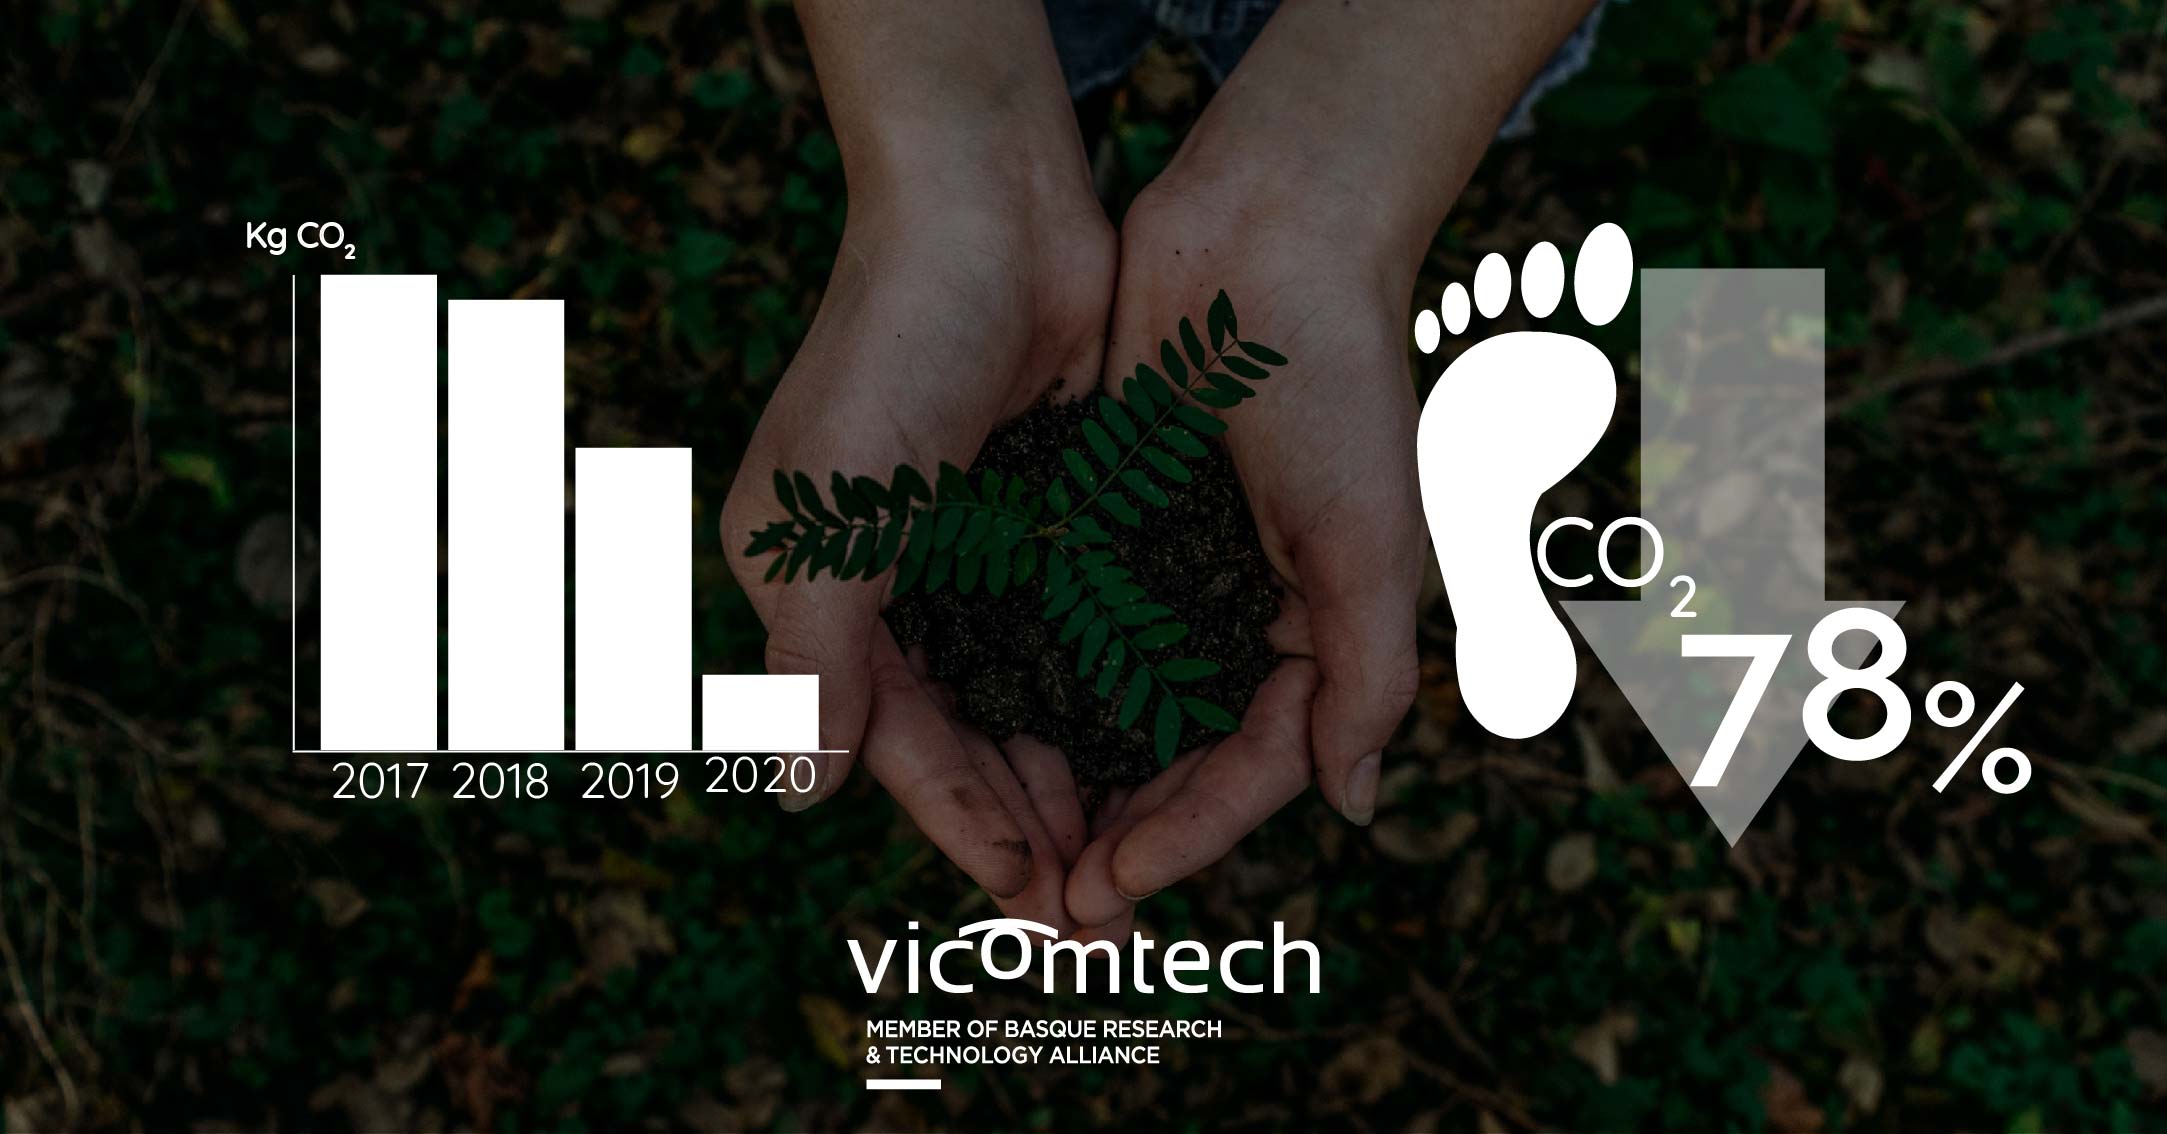 In 2020, we managed to reduce Vicomtech's carbon footprint by 78%